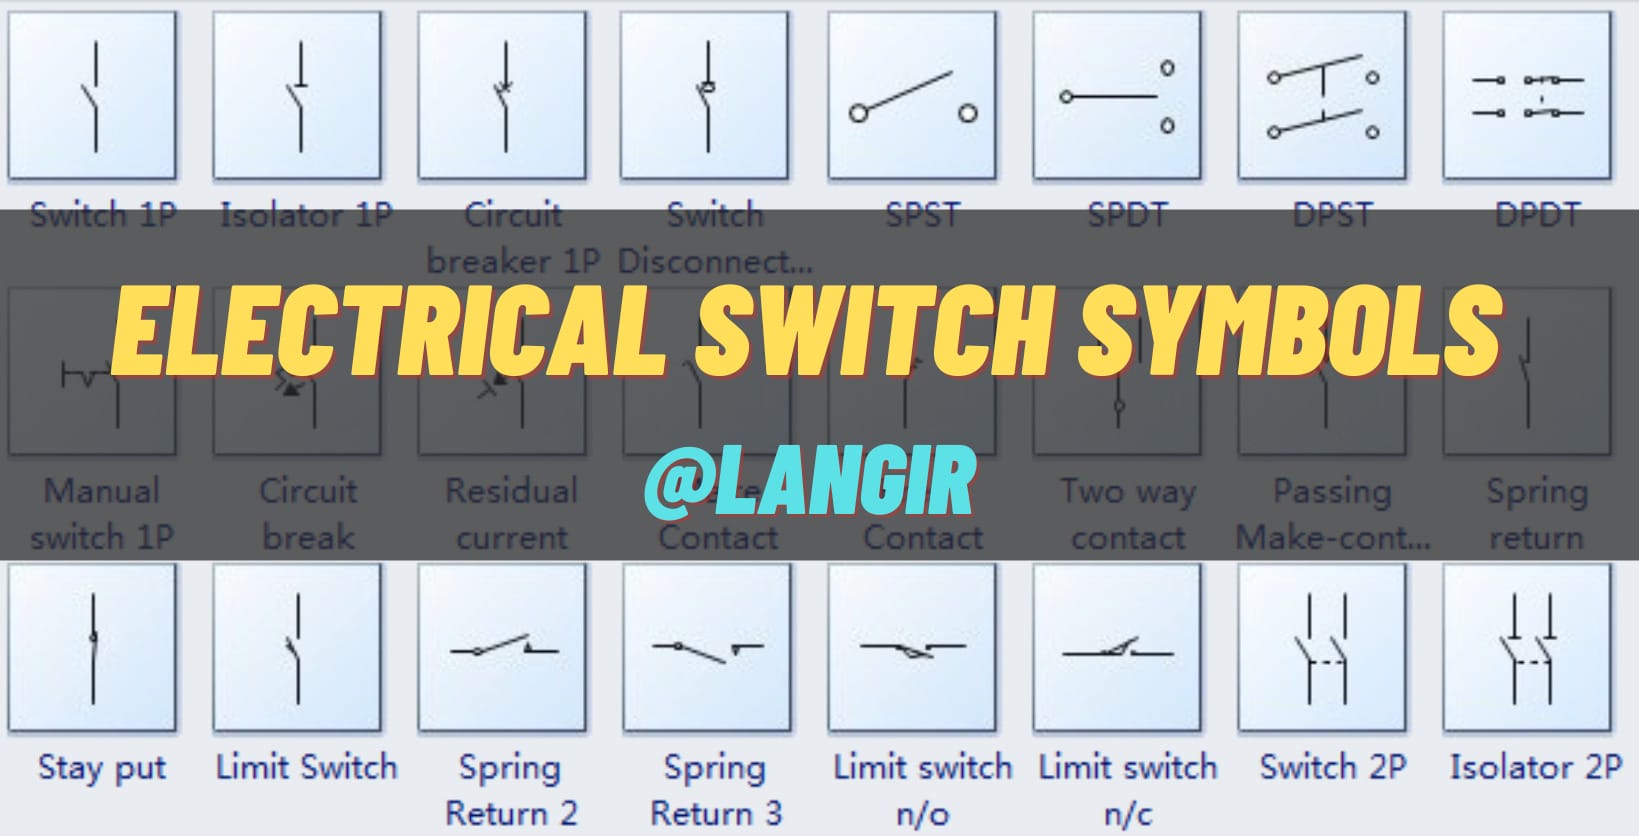 Electrical Symbols in PDF for Free Download - ETechnoG